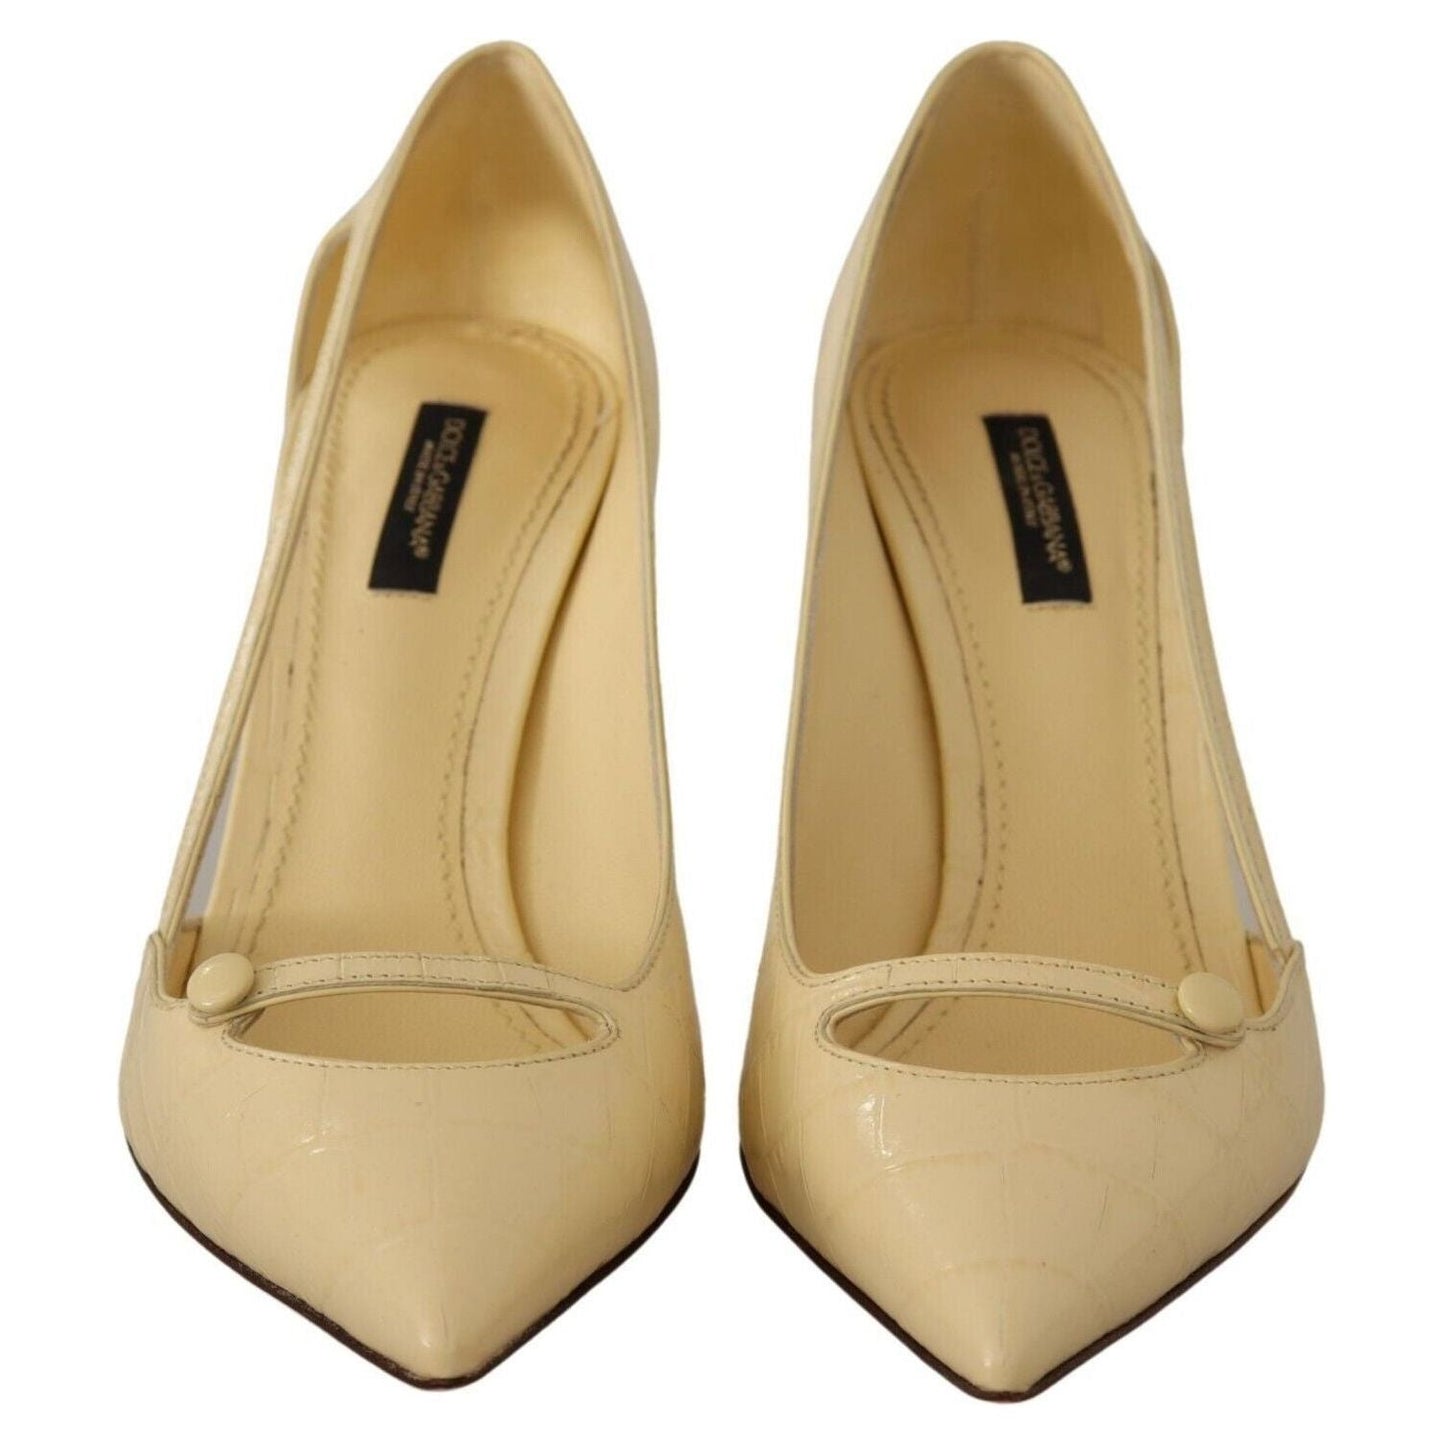 Dolce & Gabbana Chic Pointed Toe Leather Pumps in Sunshine Yellow yellow-exotic-leather-stiletto-heel-pumps-shoes